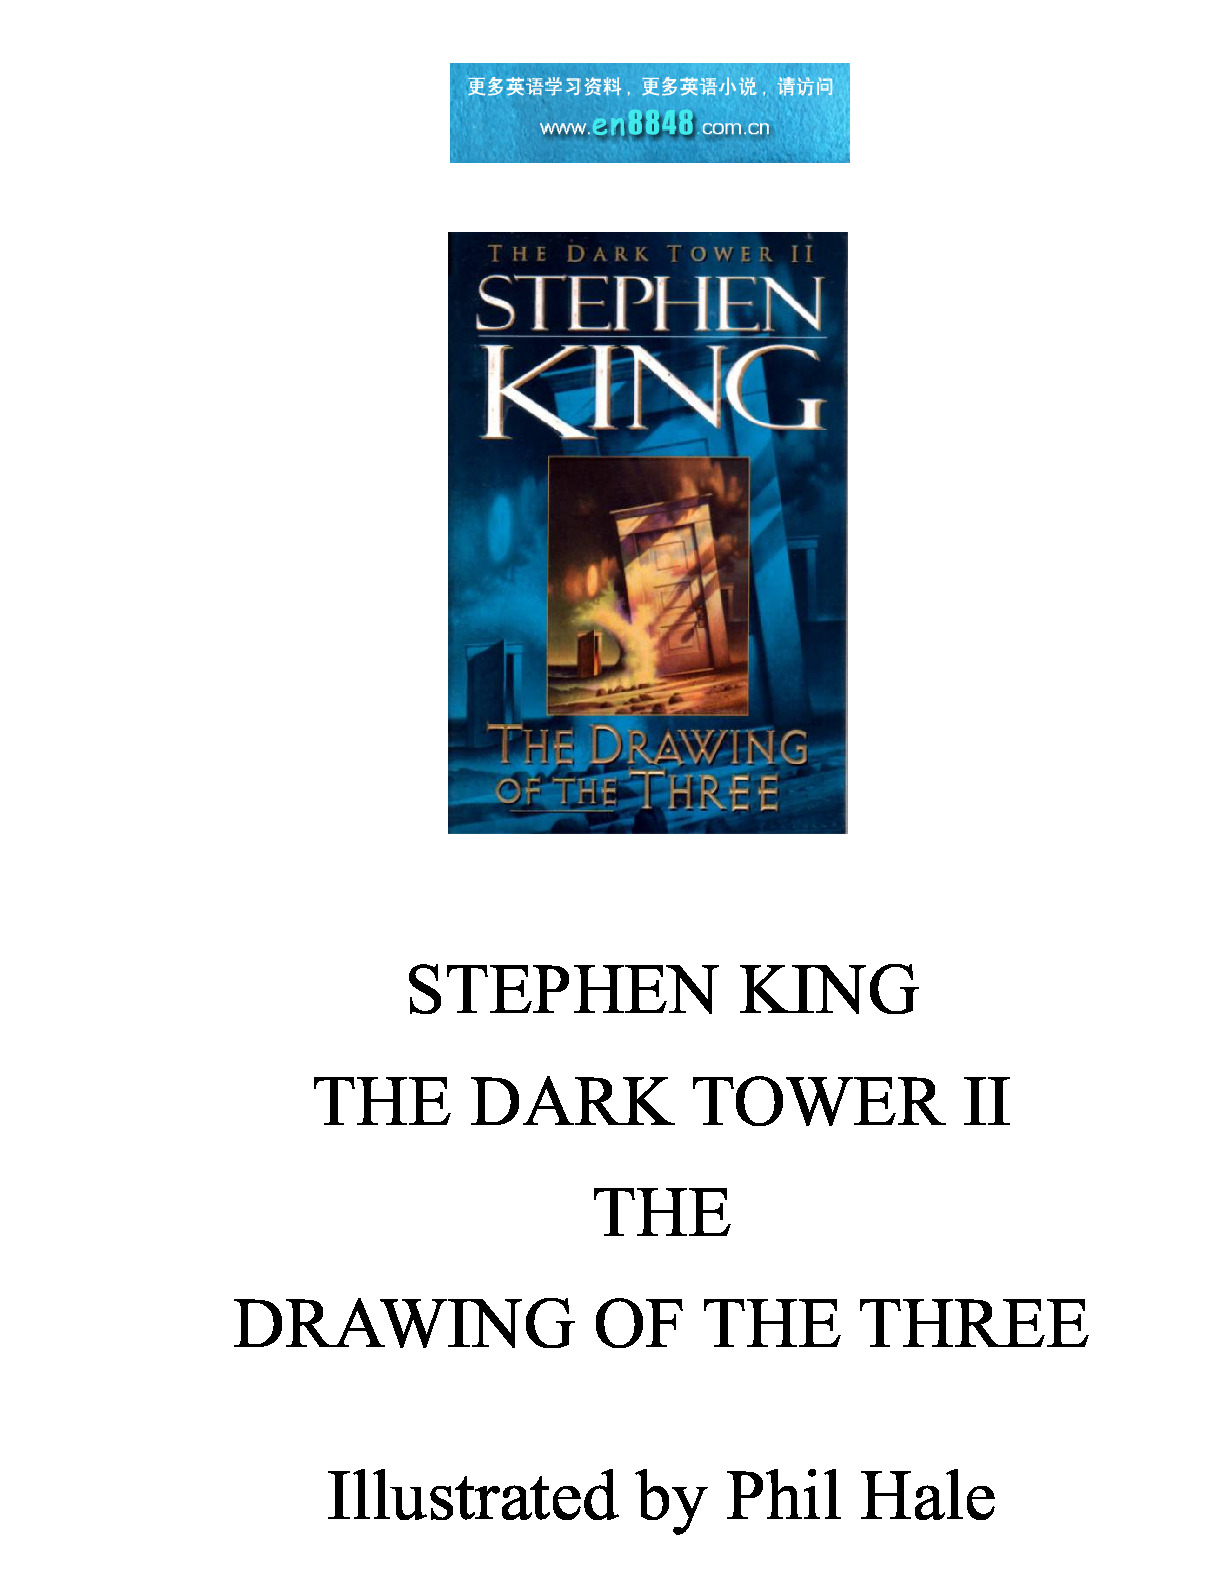 Dark Tower II—The Drawing of The Three